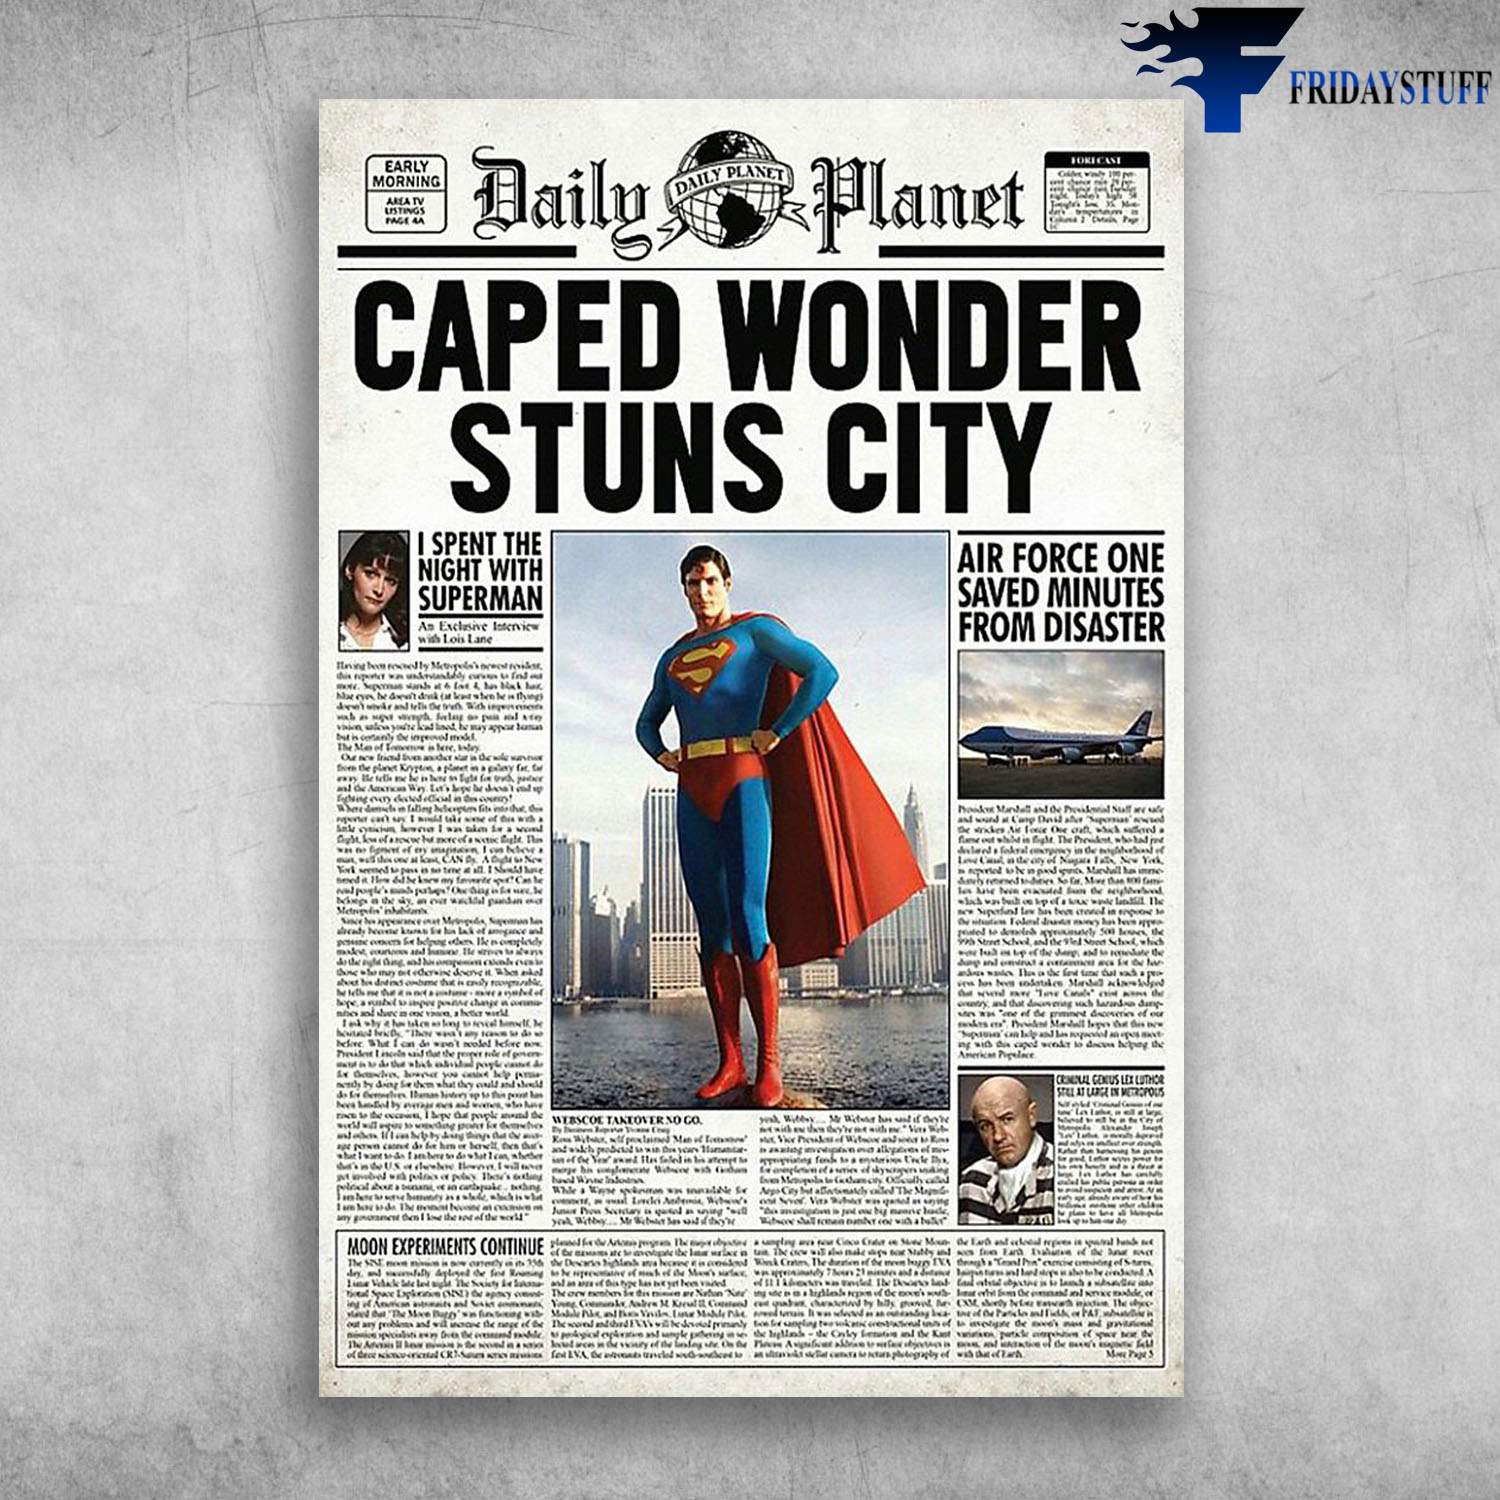 Daily Planet Caped Wonder Stuns City Super Man I Spent The Night With Super Man